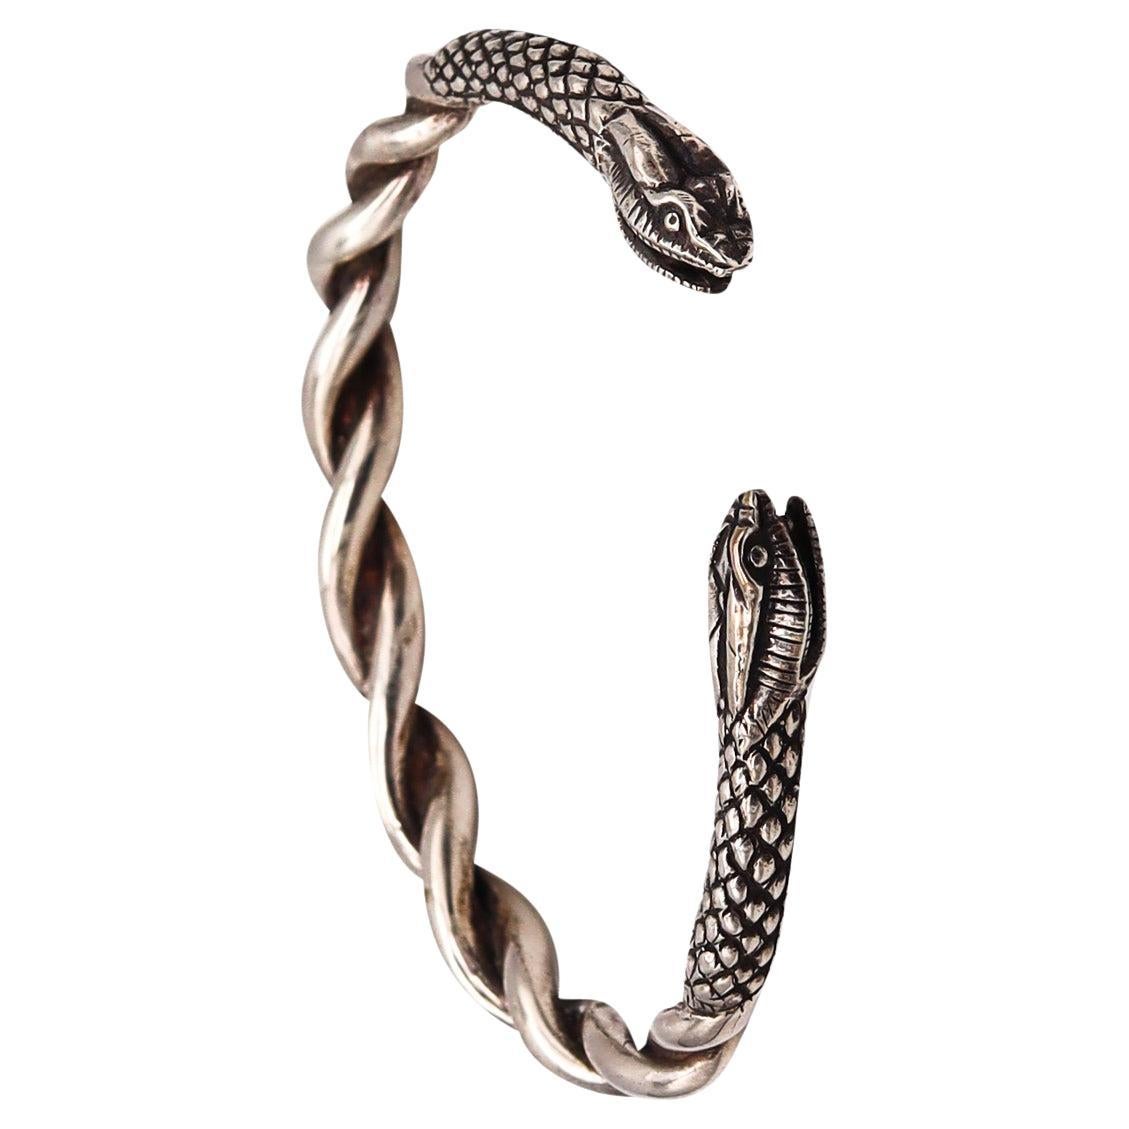 French Etruscan Revival Snakes Bracelet Cuff in Solid .925 Sterling Silver